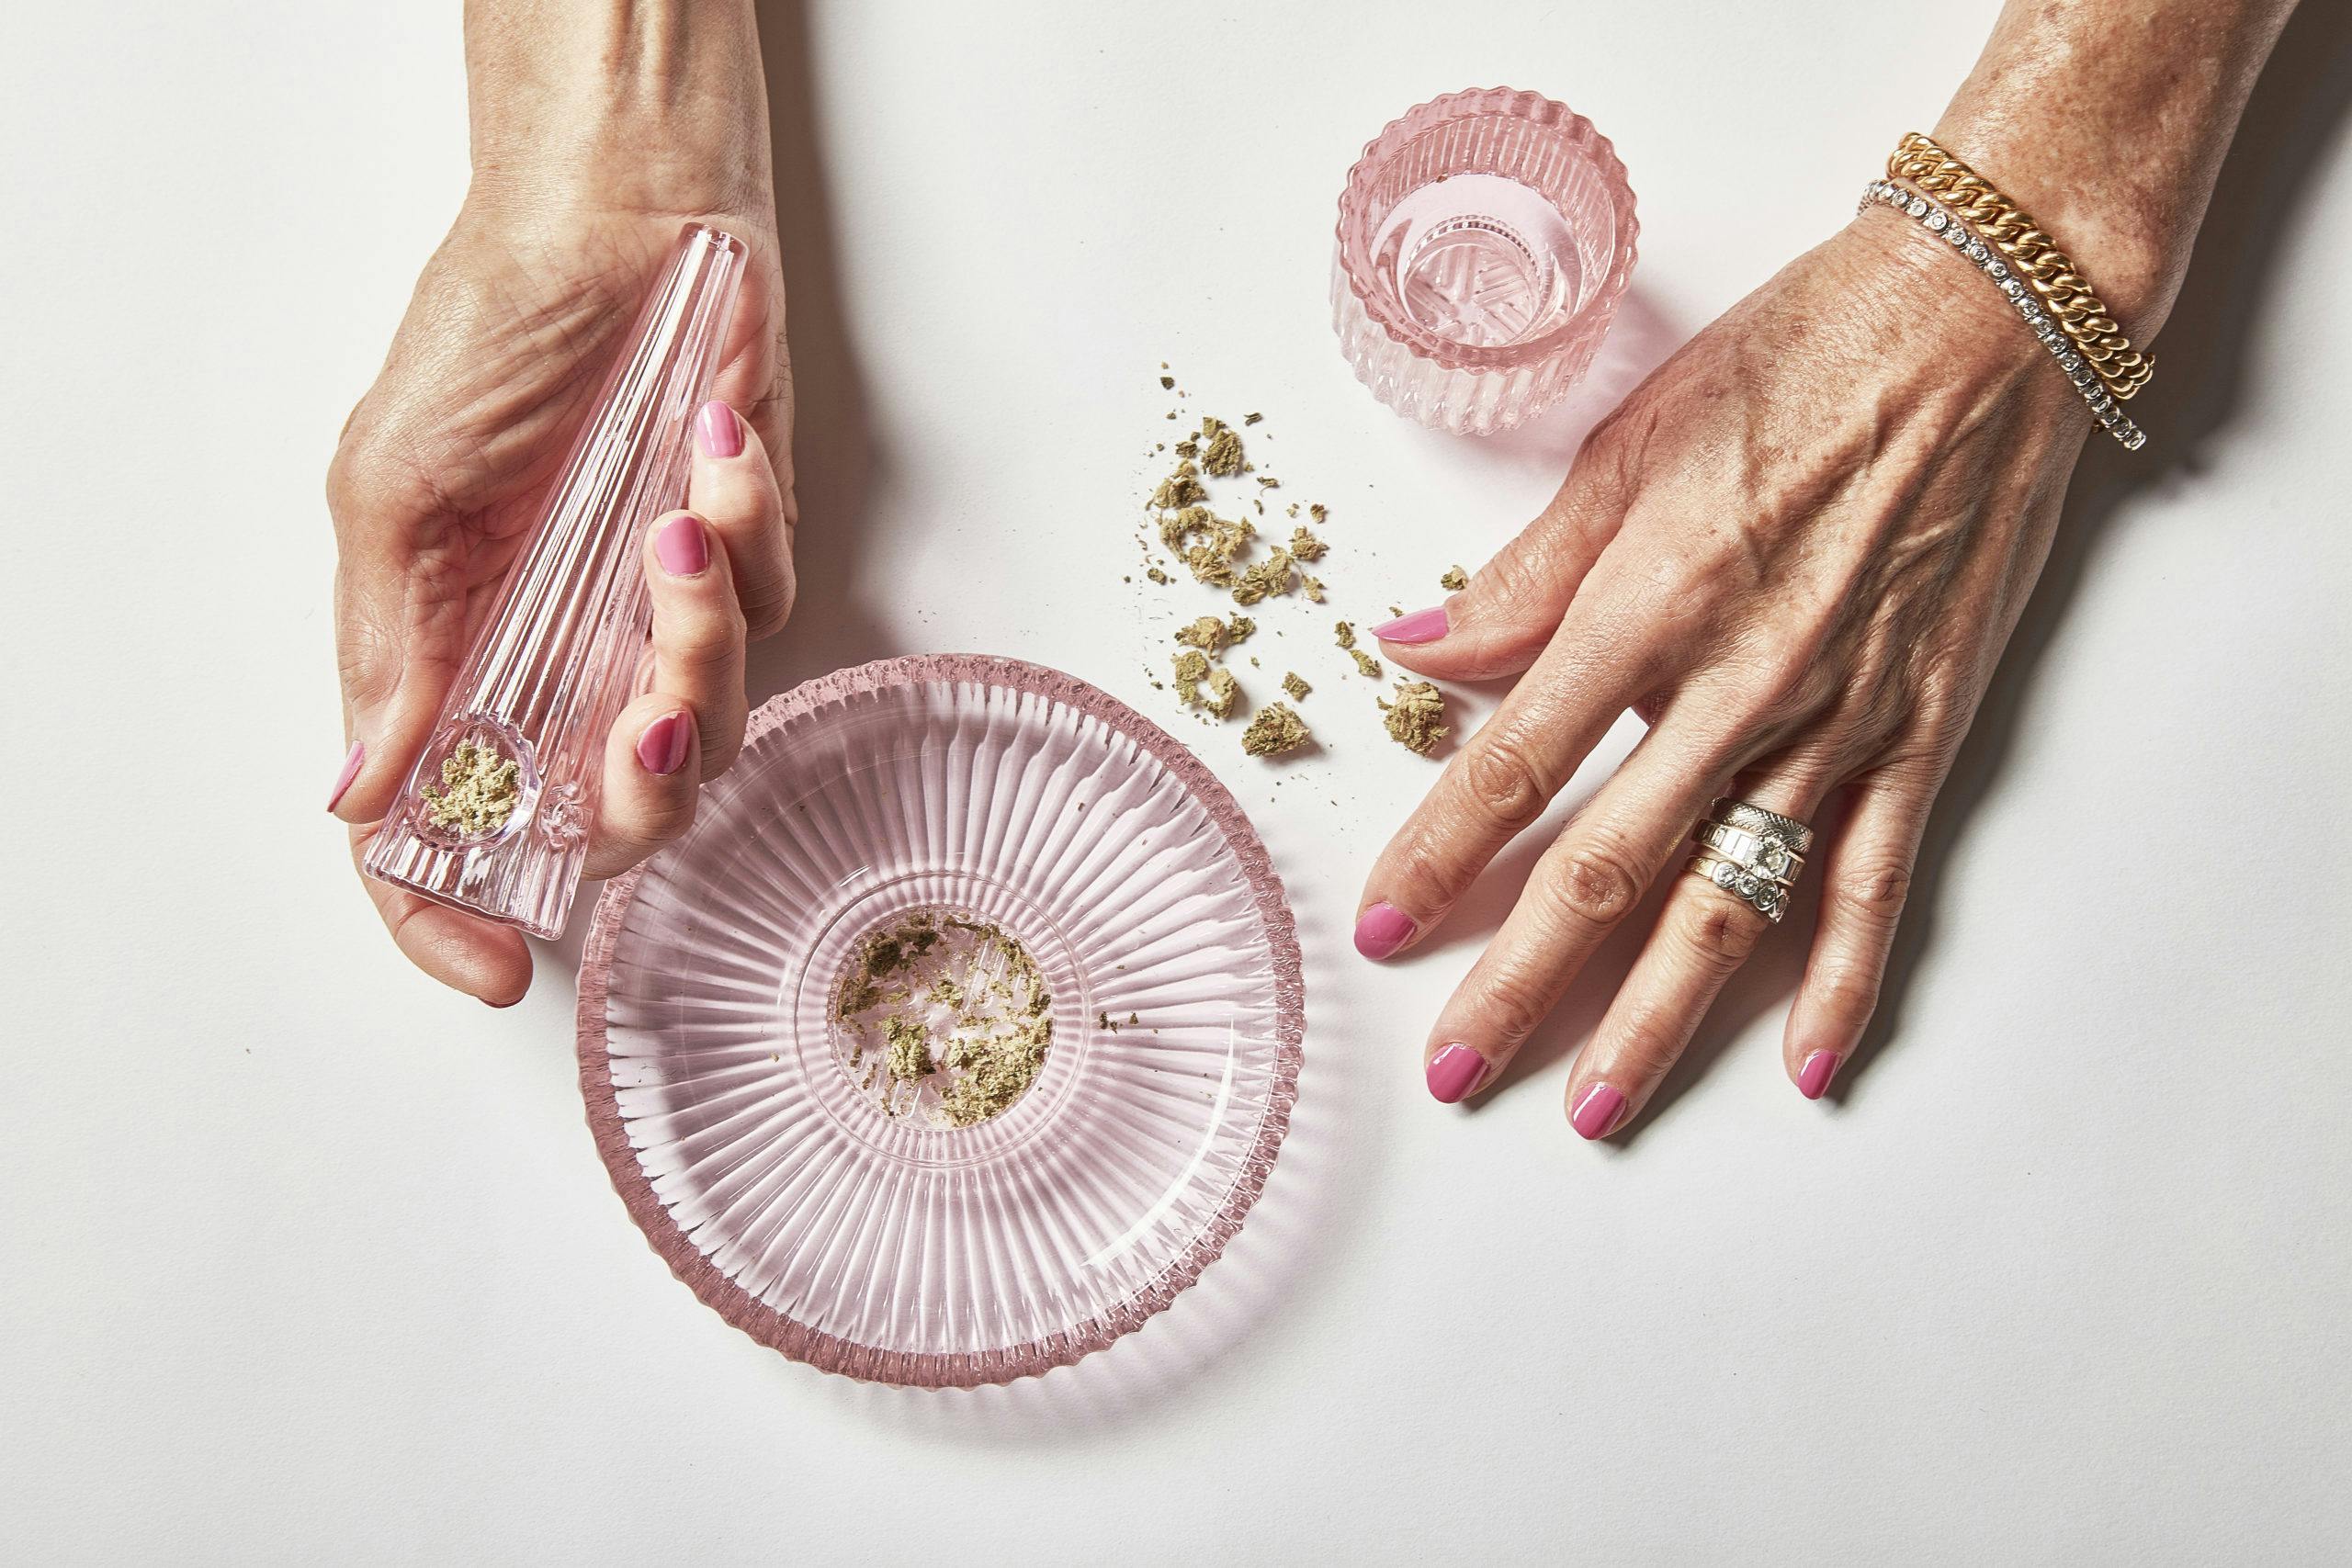 Feminine hands are holding a clear pink pipe with cannabis next to a matching pink ash tray and jar